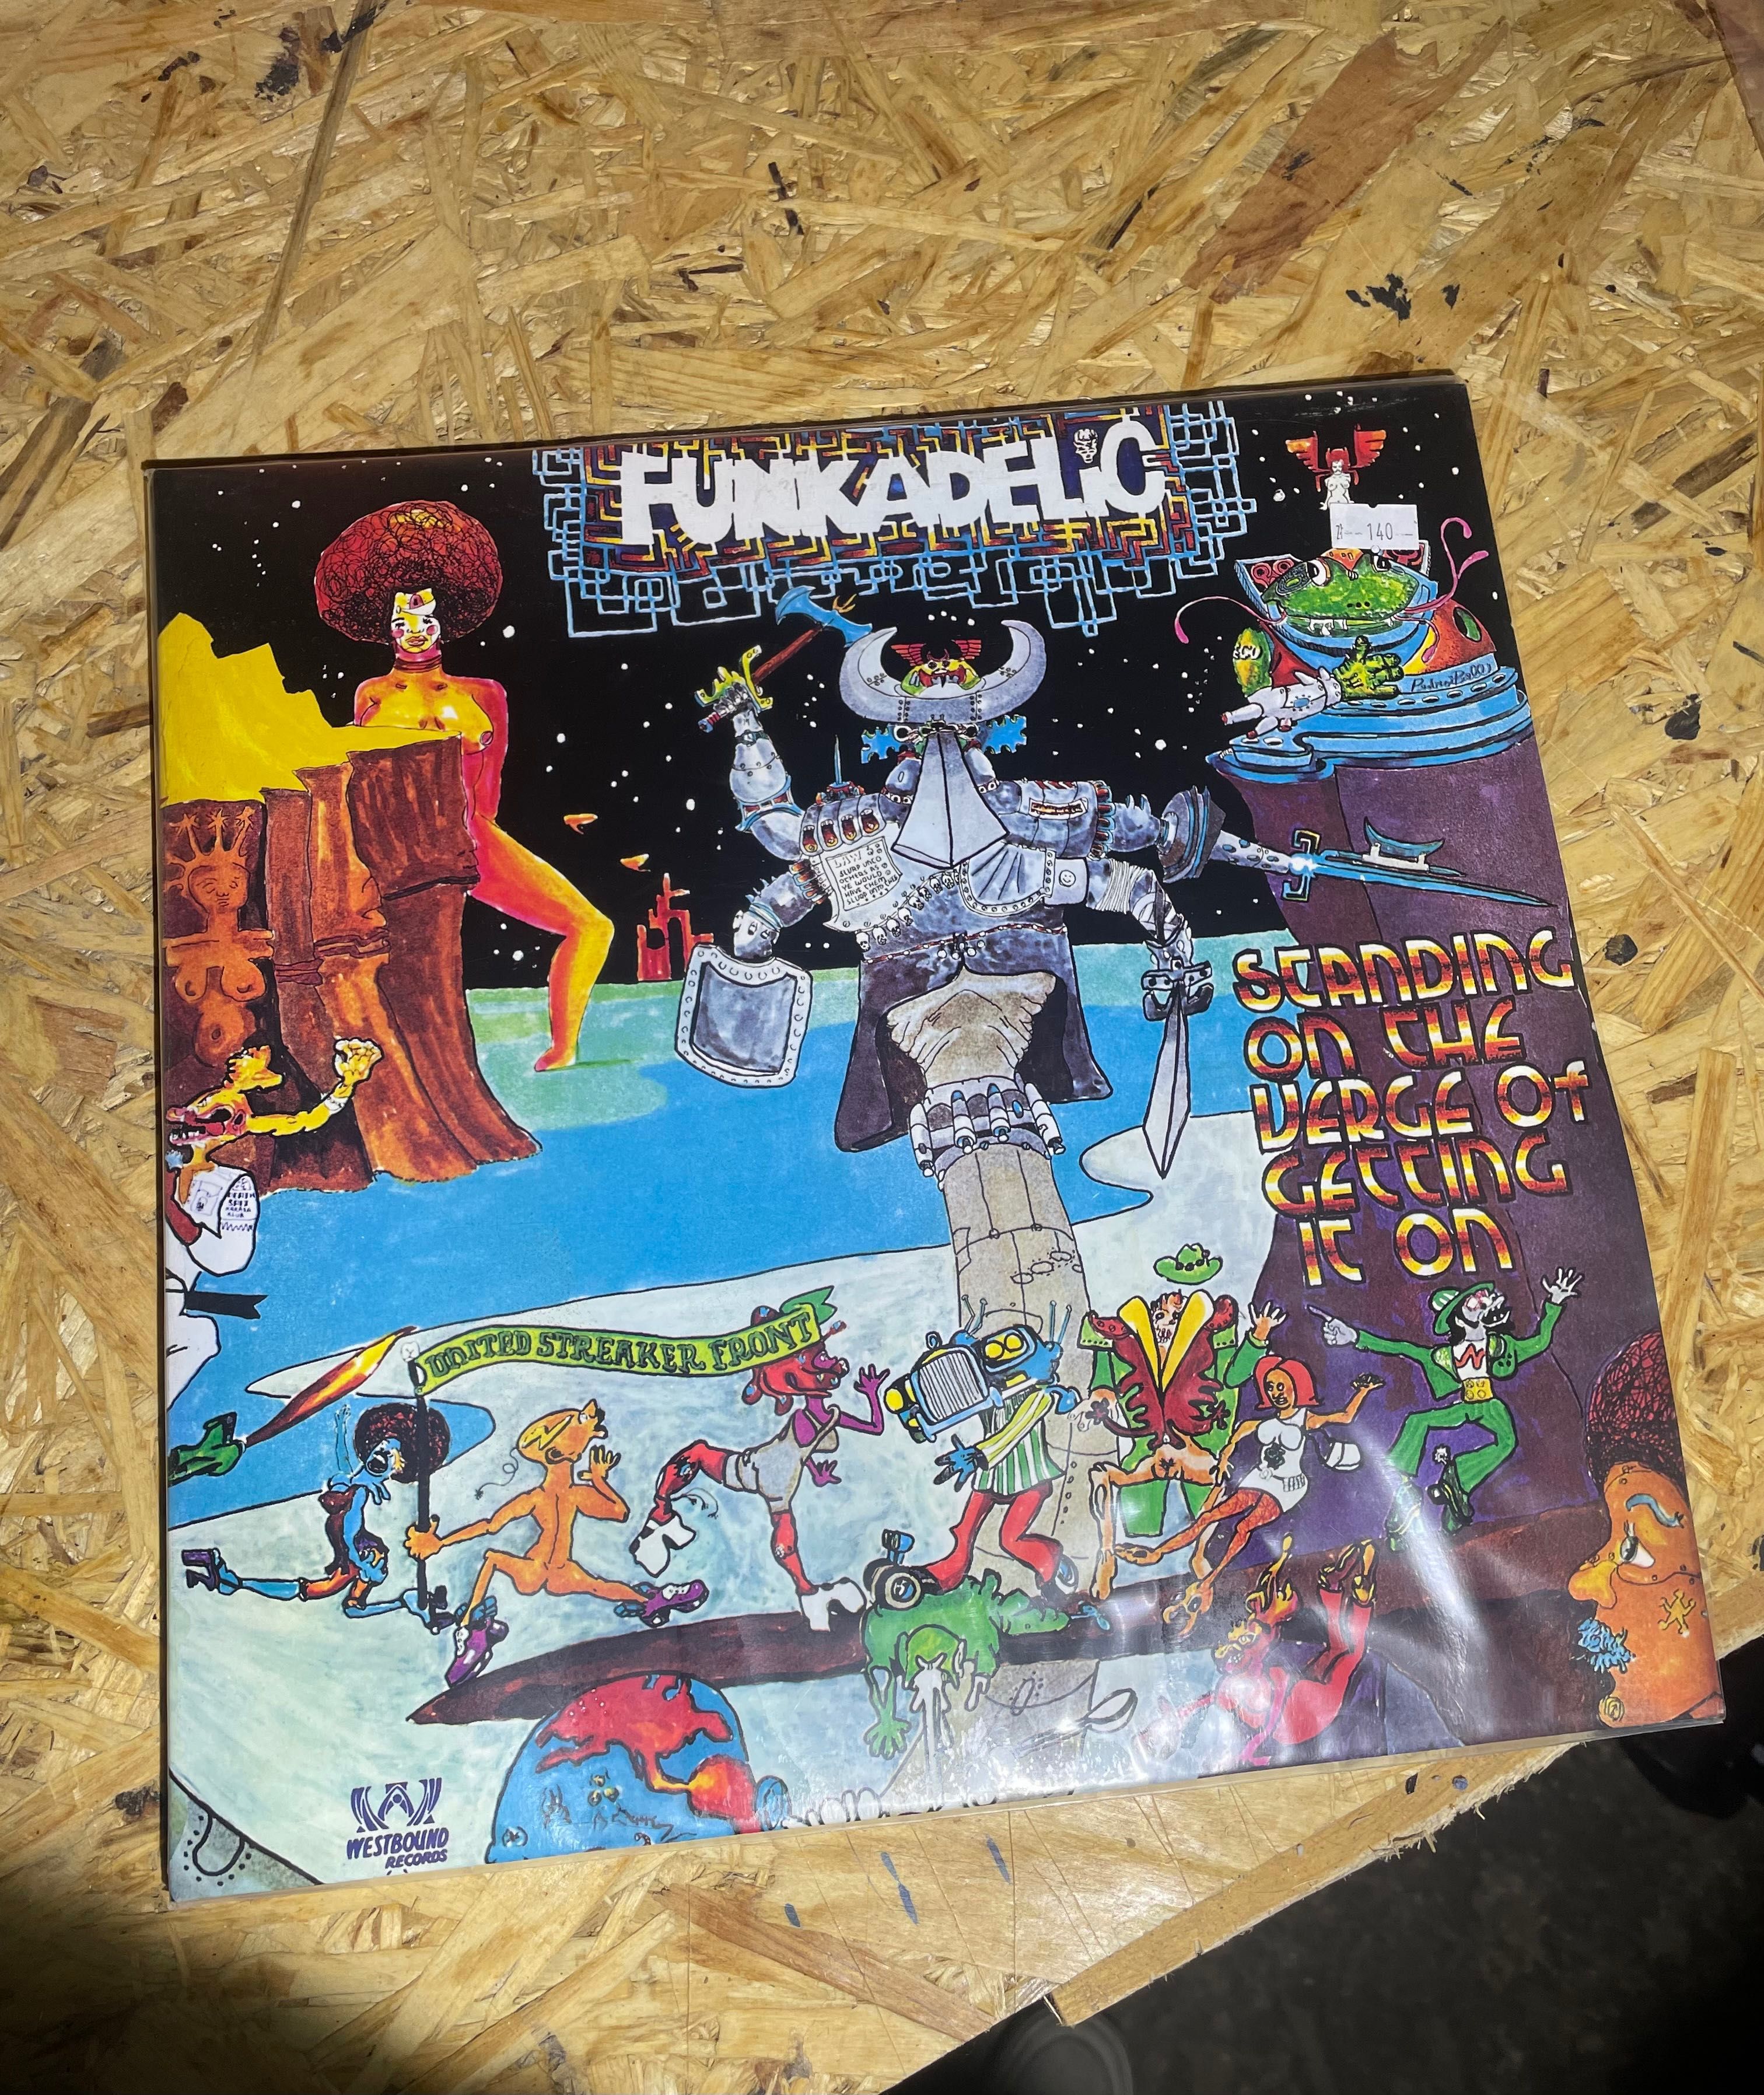 Funkadelic – Standing On The Verge Of Getting It On LP USA 1975 PROMO